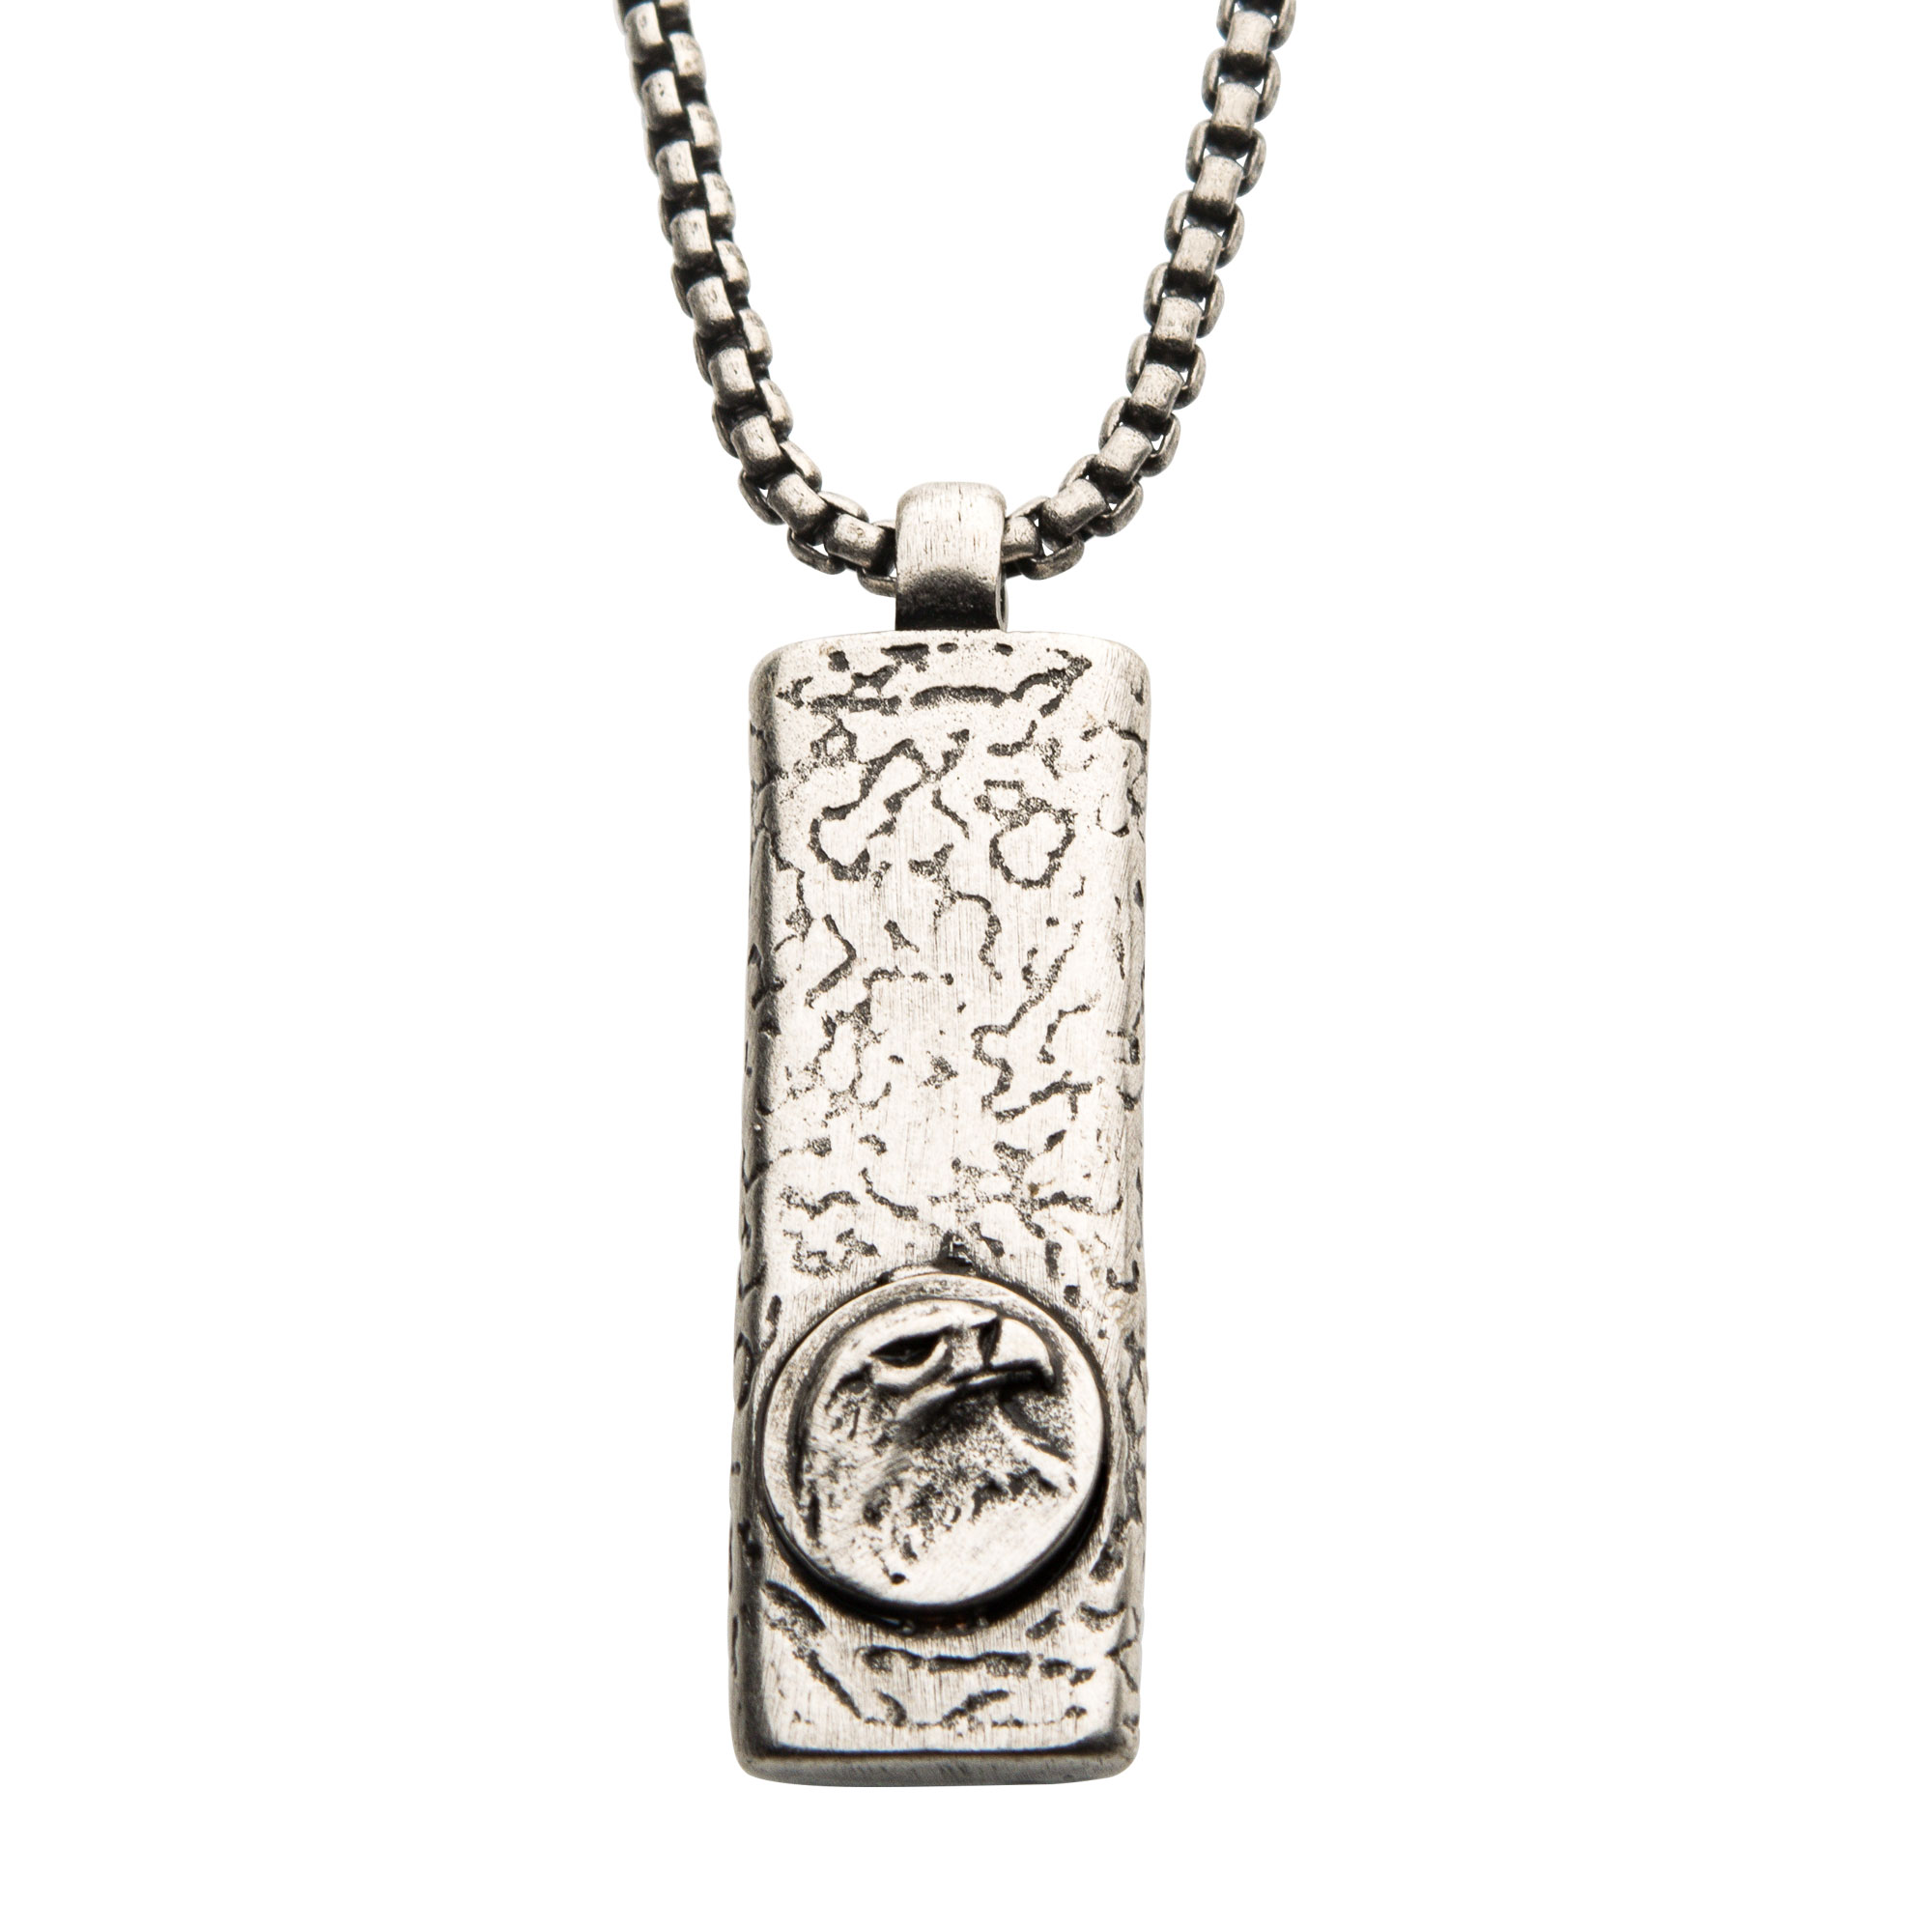 Stainless Steel Silver Plated Dog Tag Pendant with Eagle Head Inlay, with Steel Box Chain Jayson Jewelers Cape Girardeau, MO